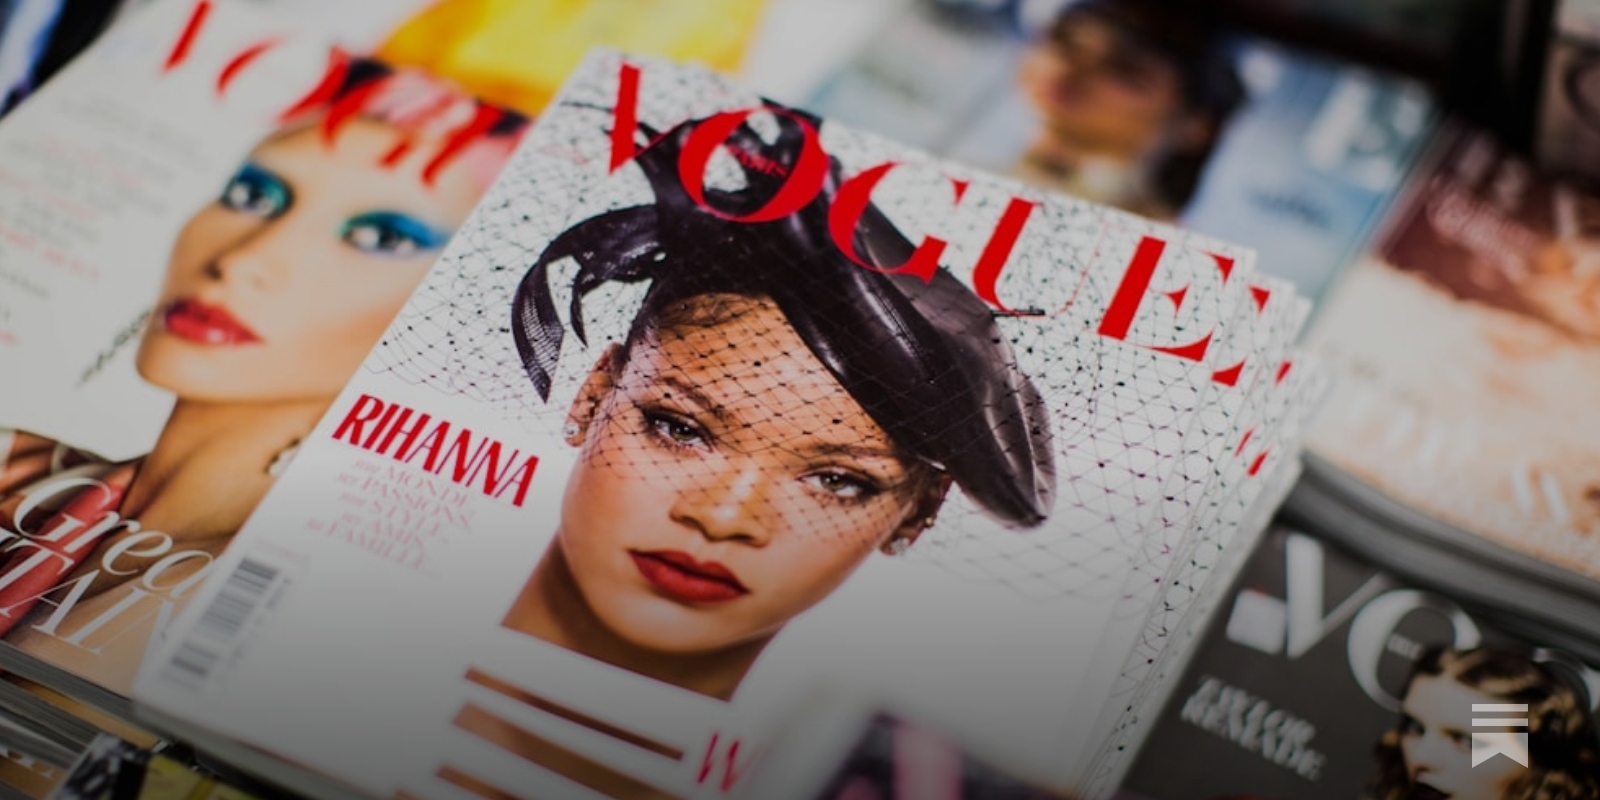 The Monthly Fashion Magazine Is No More